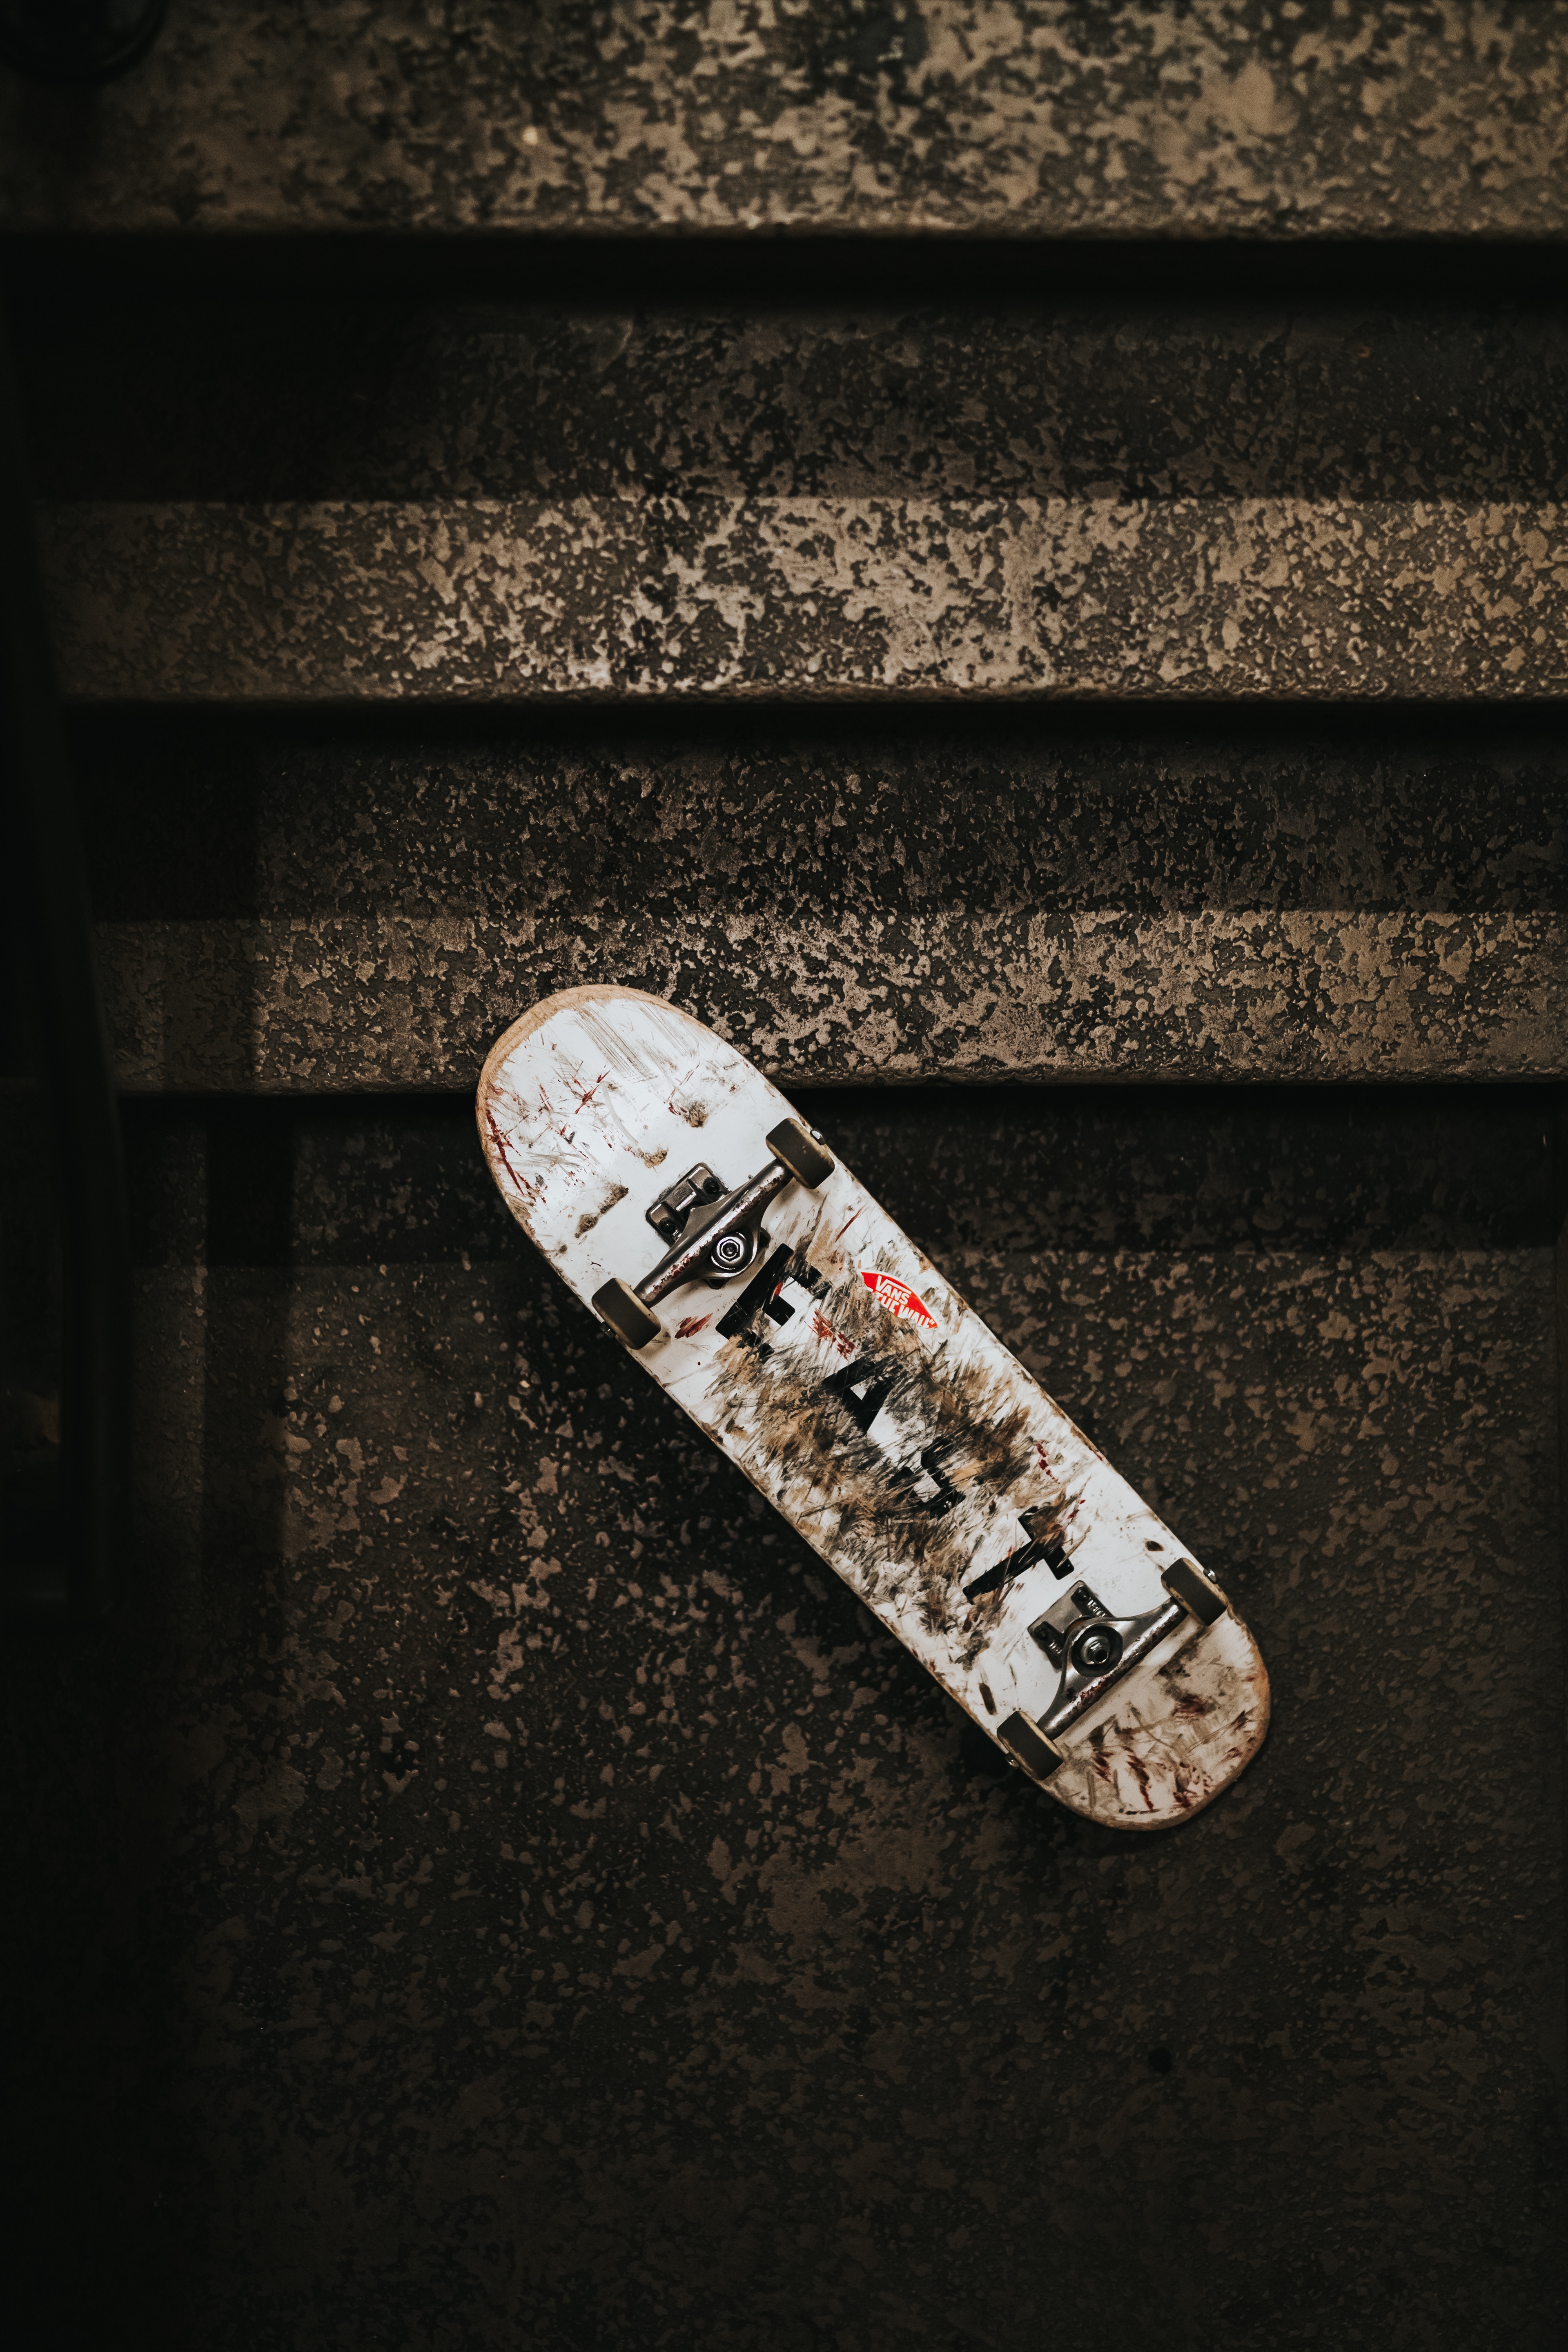 sports, lost, stairs, ladder, shabby, skateboard, wheels, dirty cell phone wallpapers